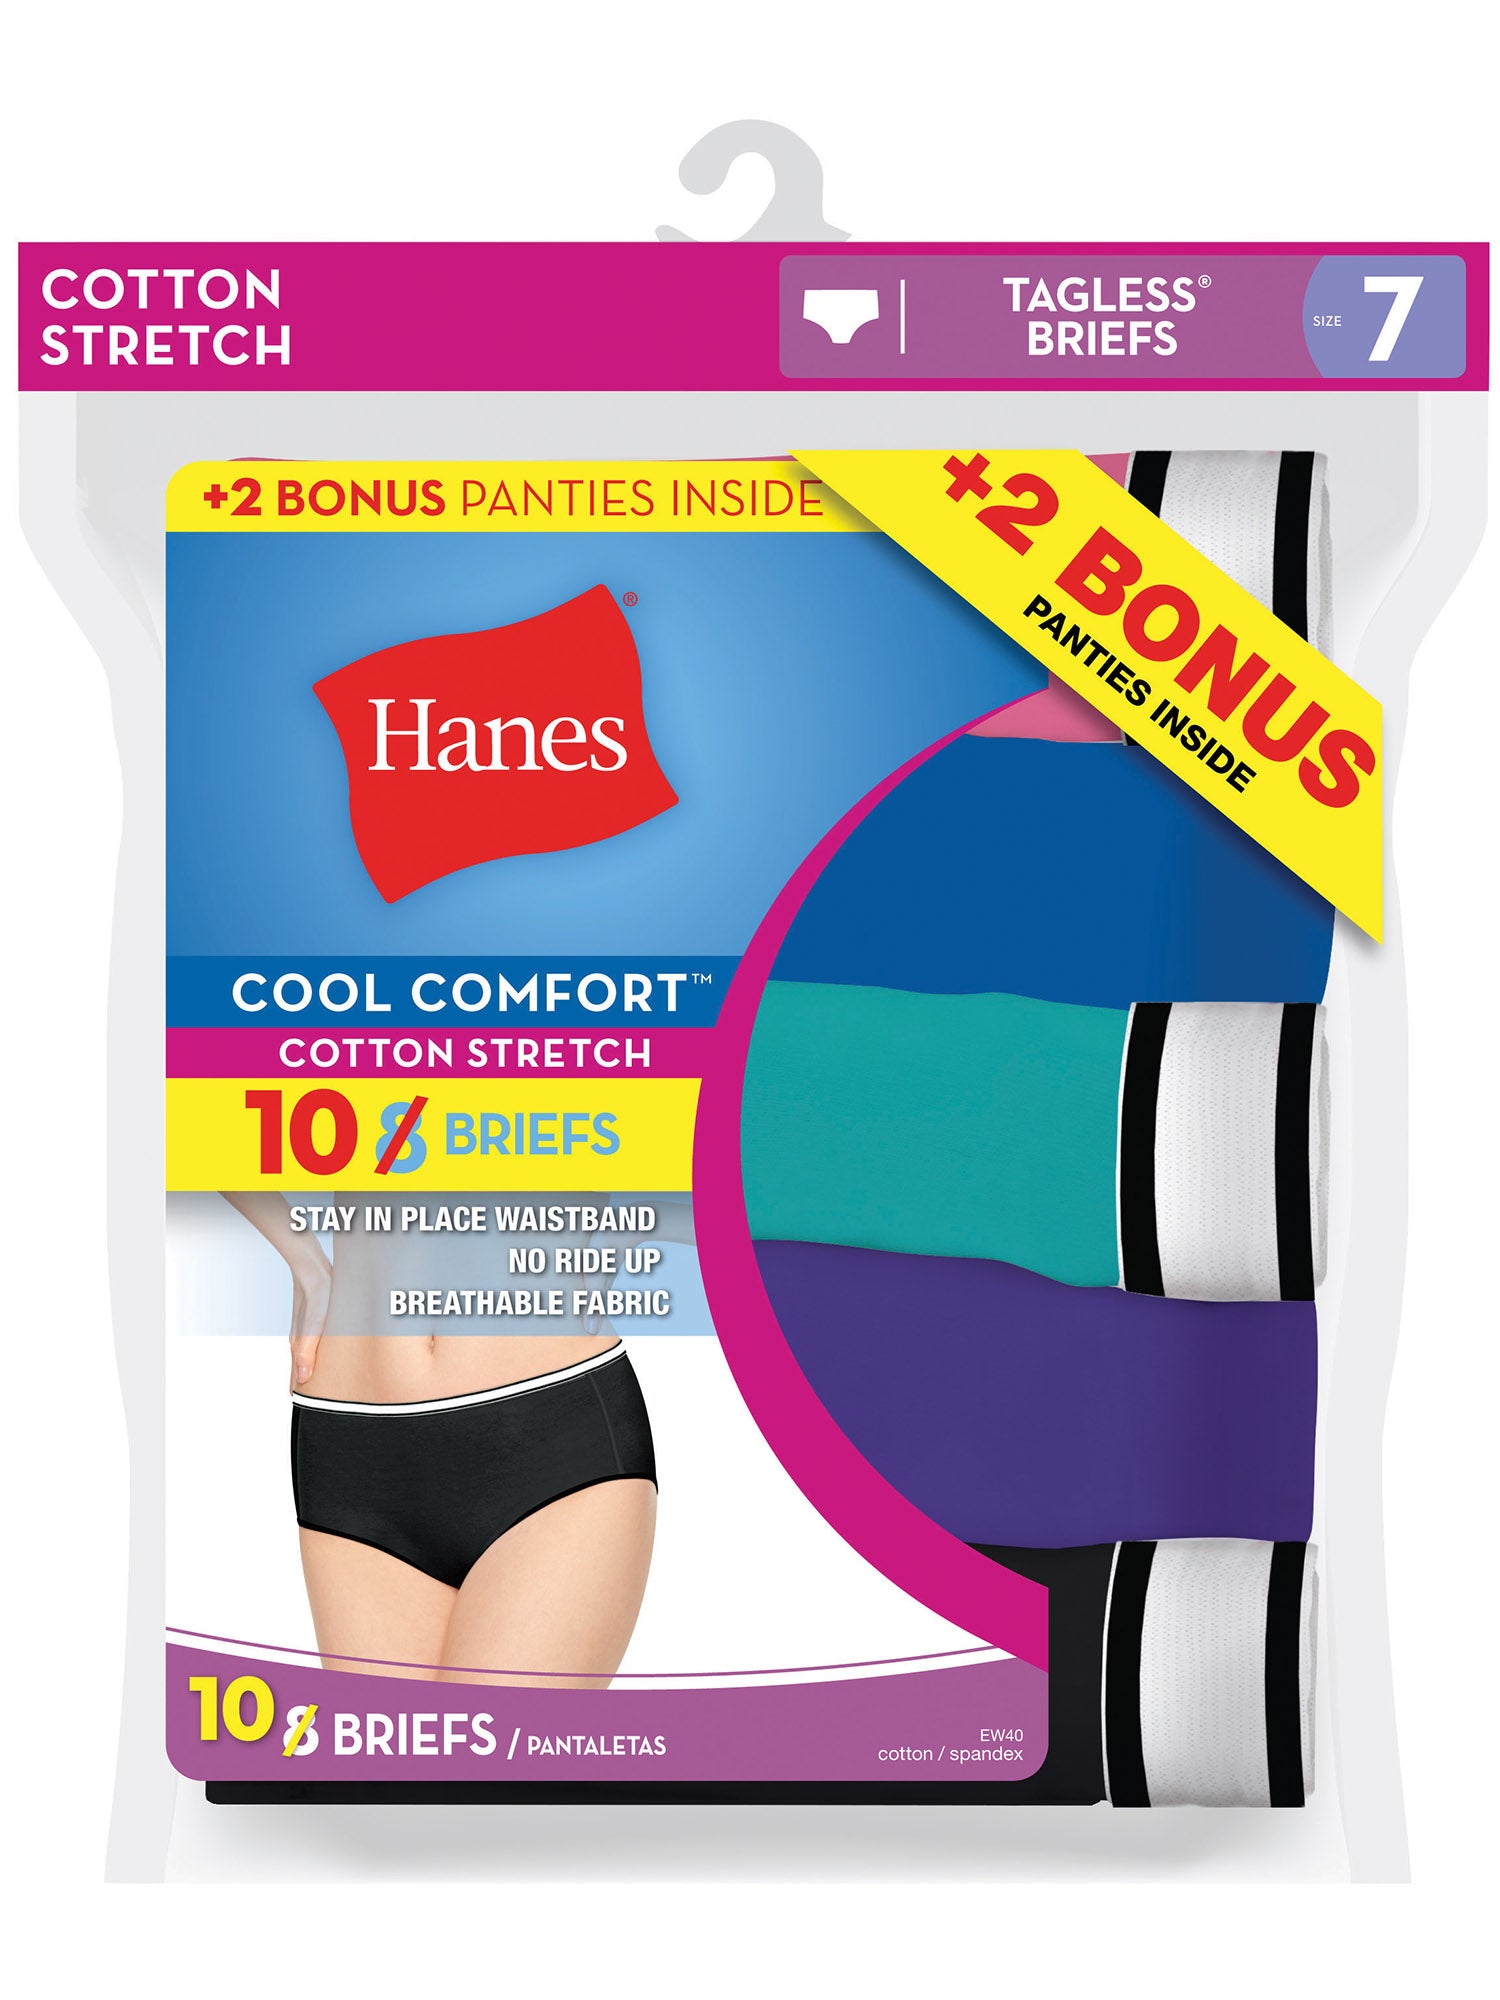 HANES HER WAY Pack Of 2 White Cotton Stretch Panties Size 5 - New